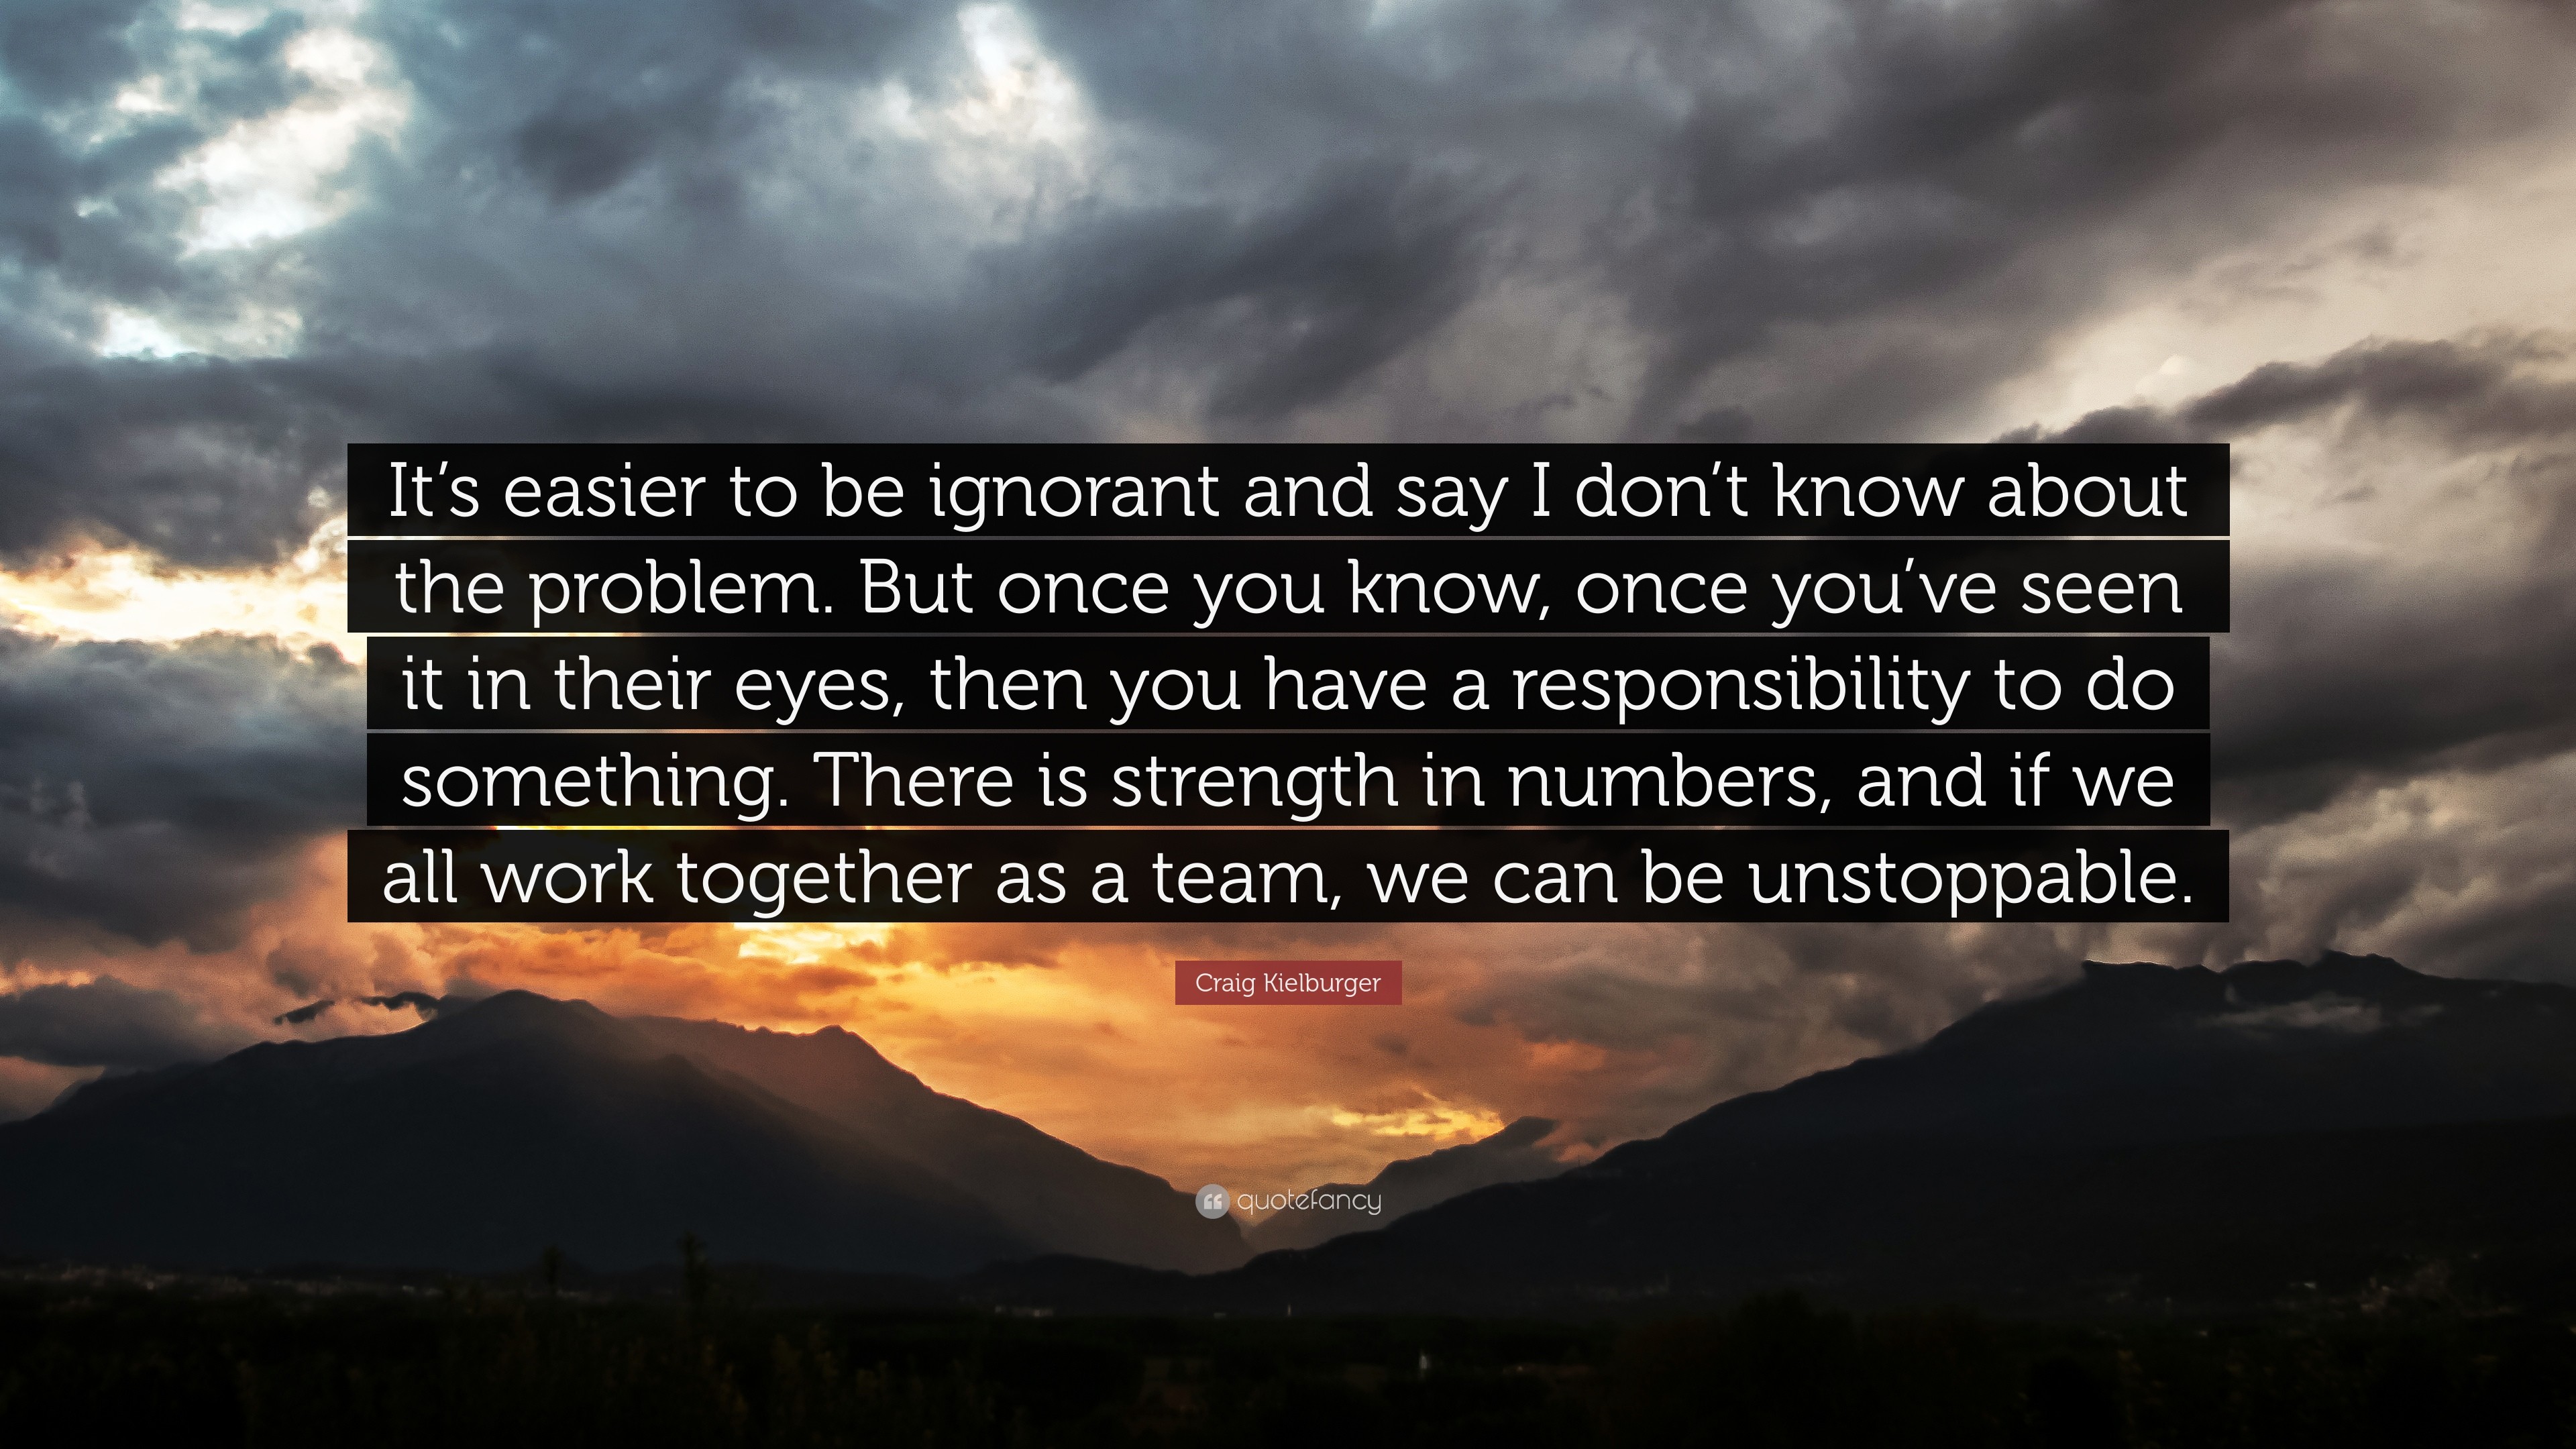 3840x2160 Craig Kielburger Quote: “It's easier to be ignorant and say I don't